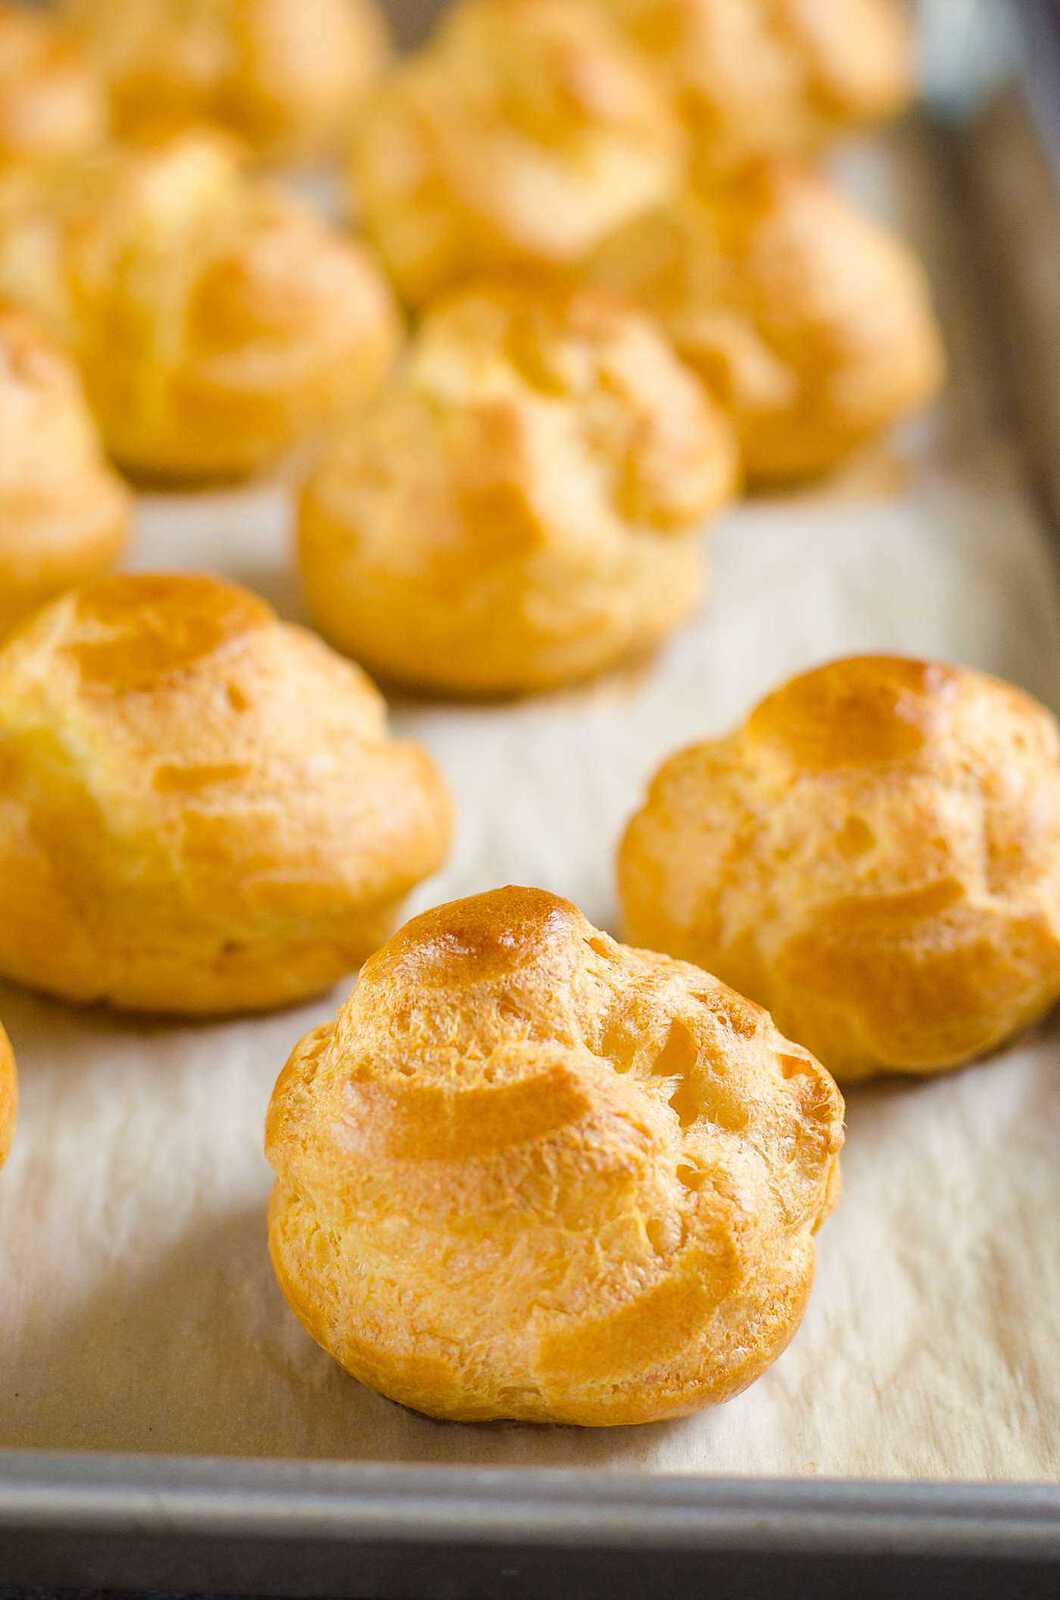 Puffed up and golden brown choux pastry, ready to be used for cream puffs